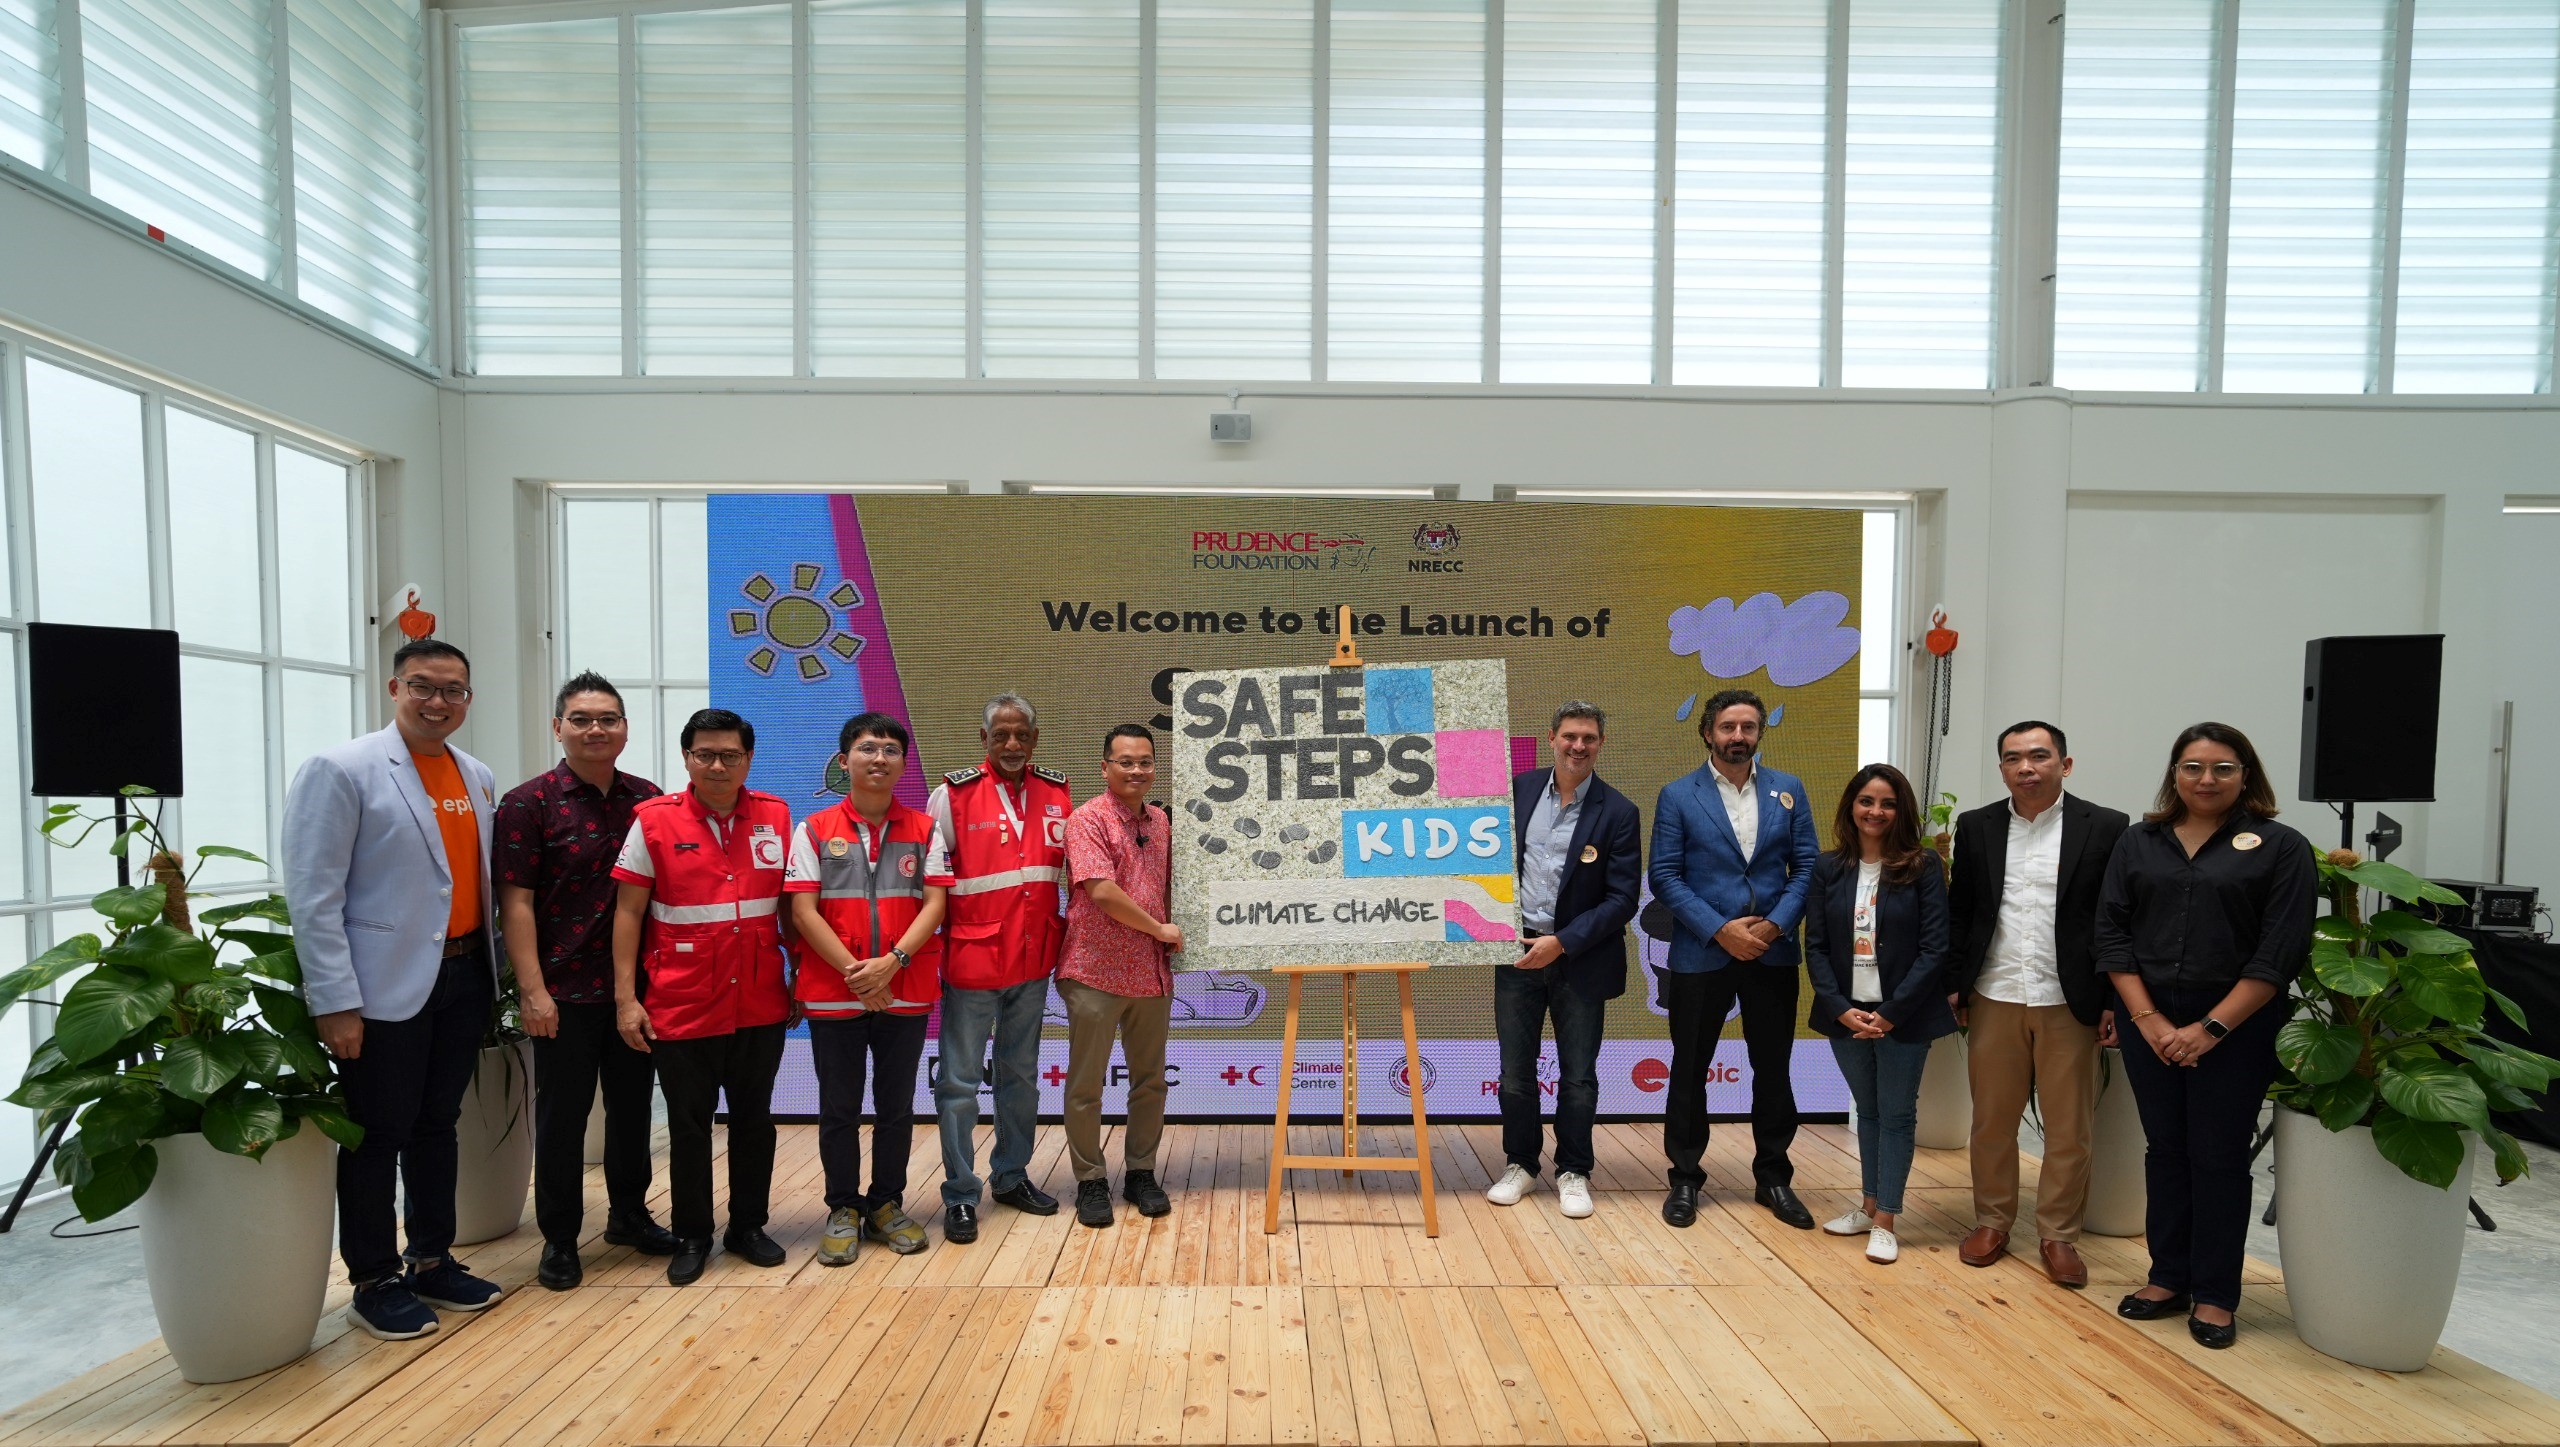 Nik Nazmi (6th from left) and Marc Fancy (5th from right) launching SAFE STEPS Kids Climate Change in Malaysia